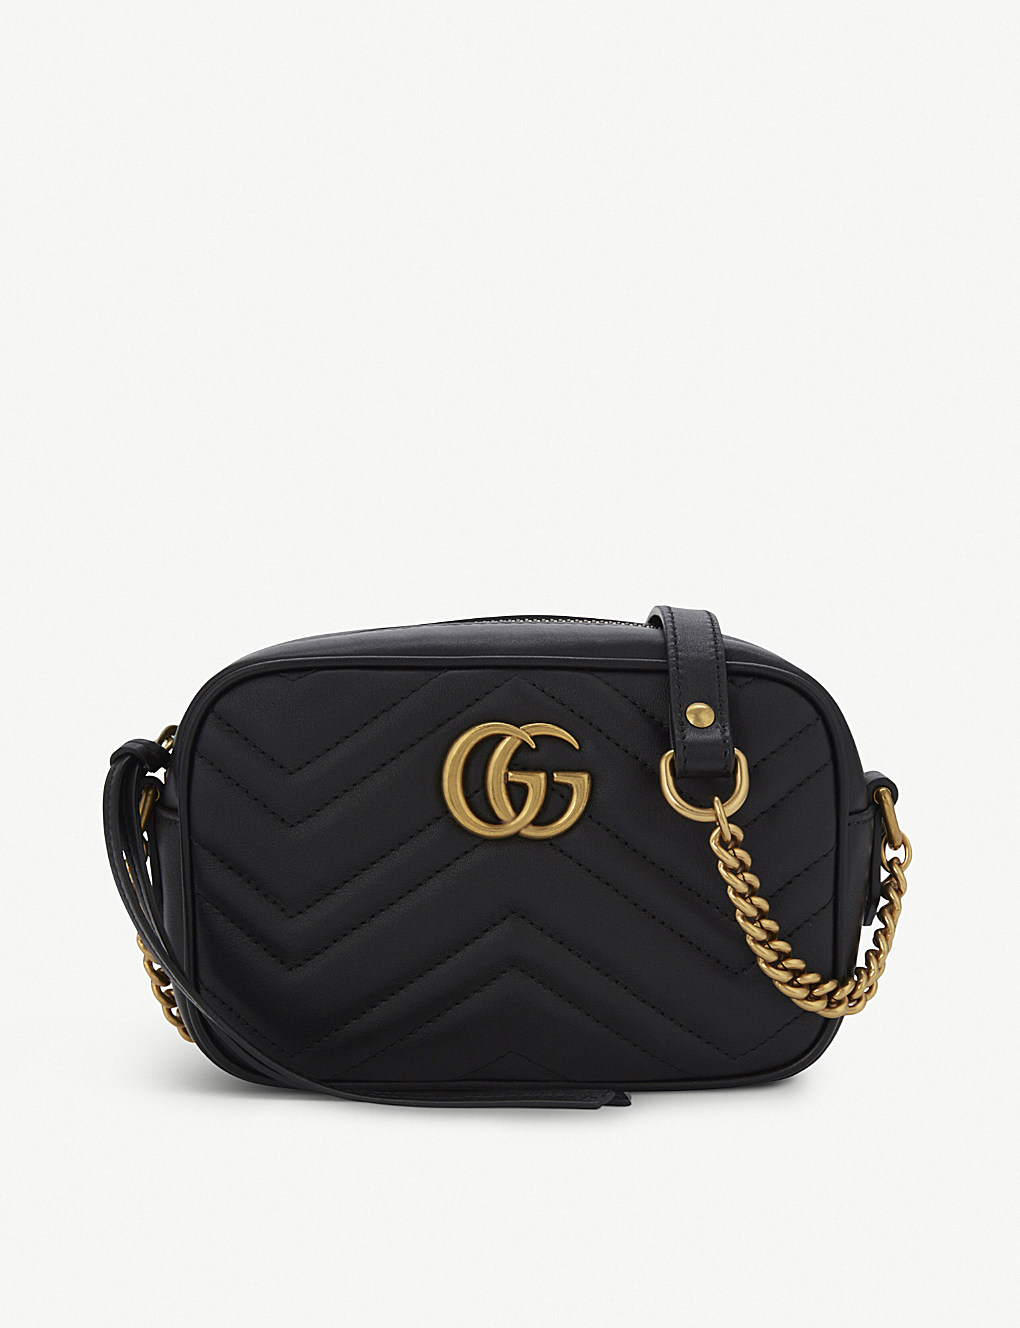 what is the price of a gucci bag